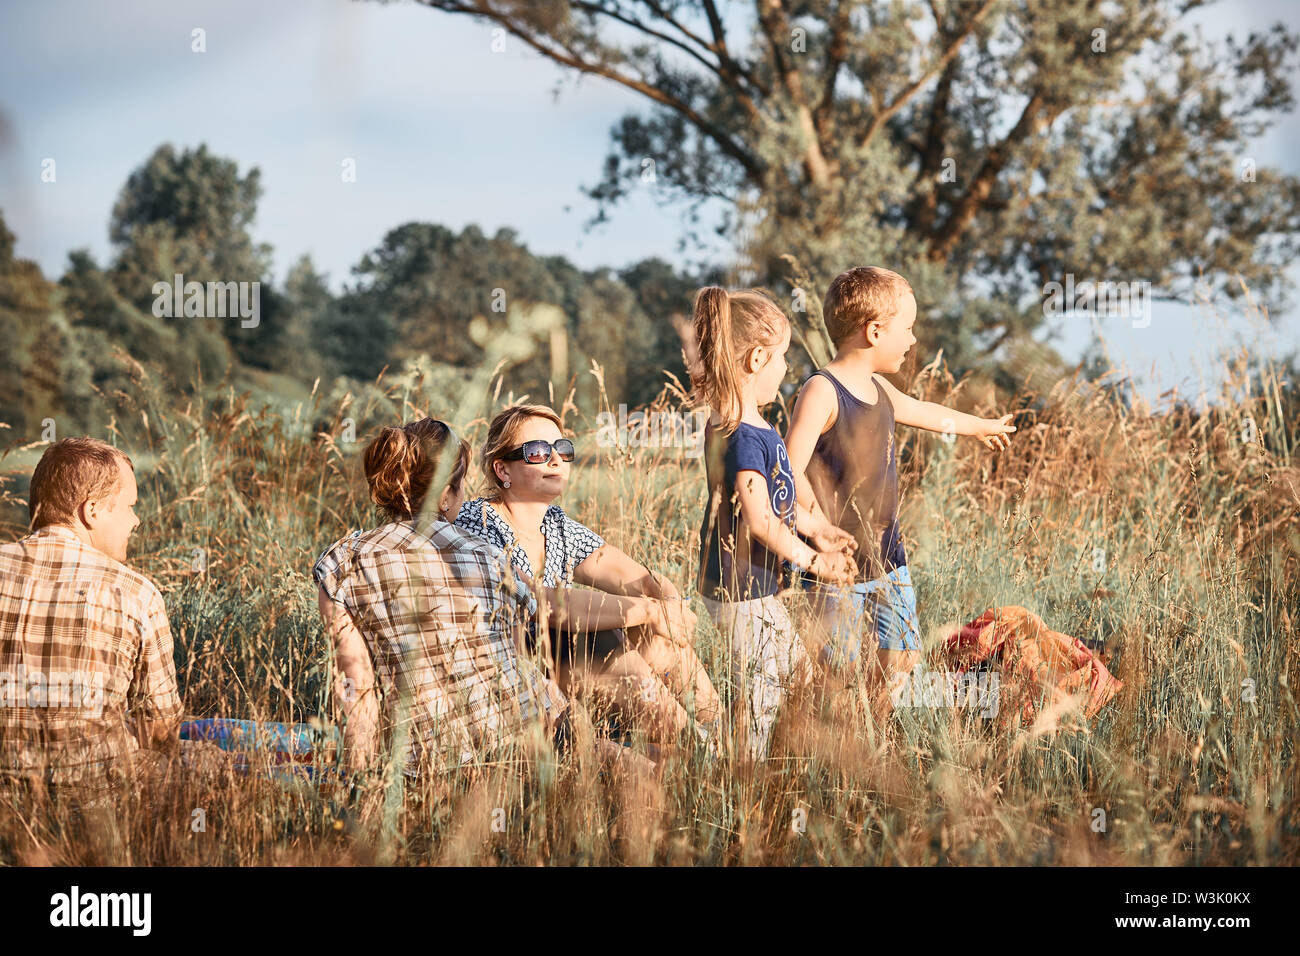 Family spending time together on a meadow, close to nature. Parents and children sitting and playing on a blanket on grass. Candid people, real moment Stock Photo